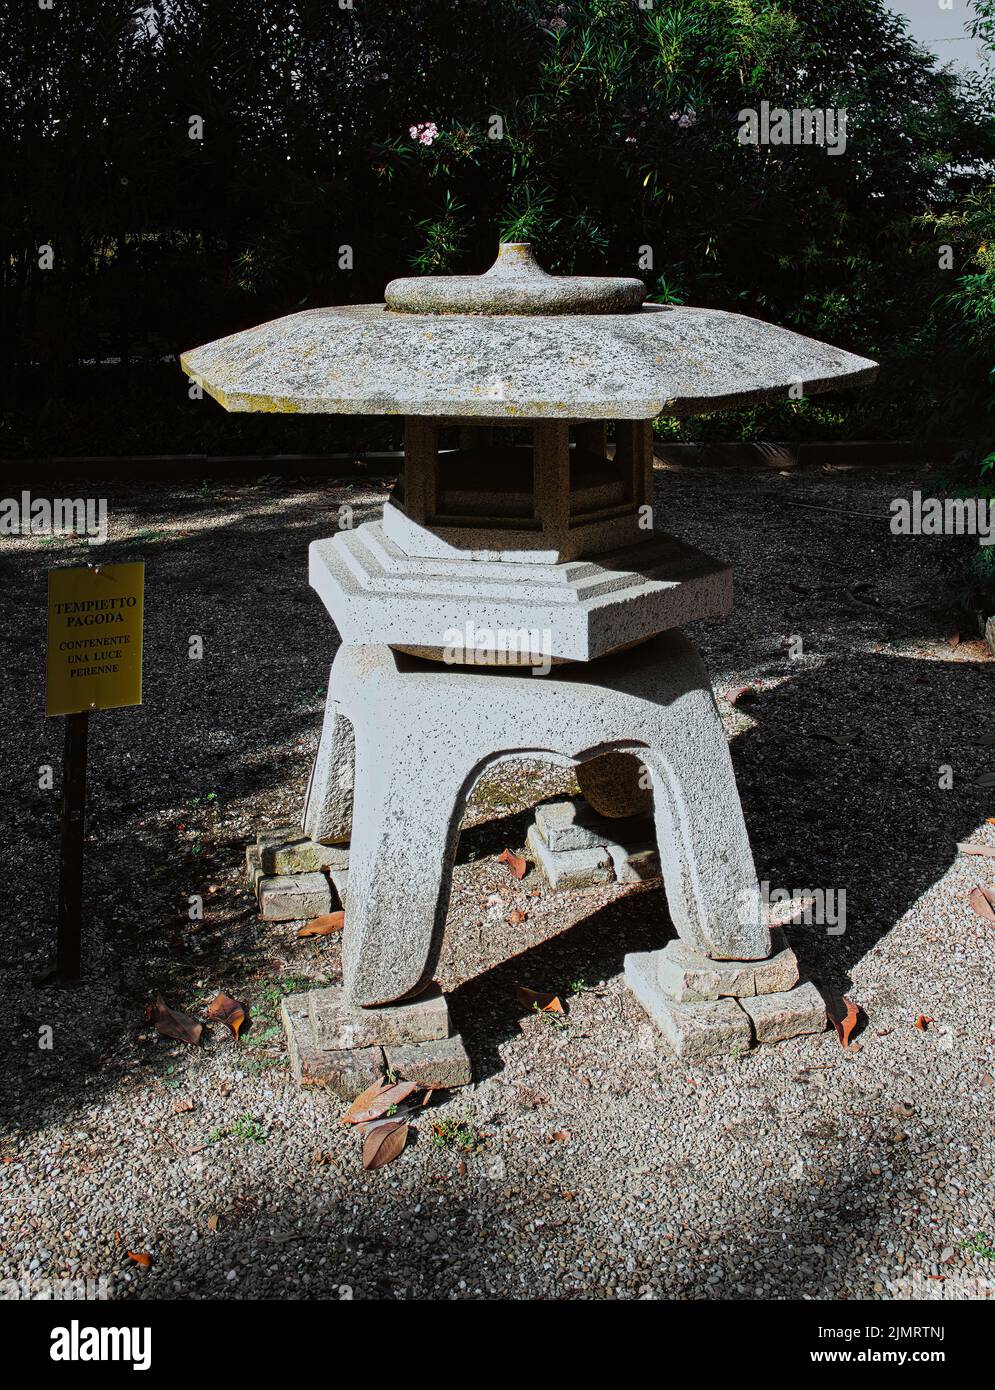 A Pagoda voted donated  from the Japanese Emperor Hirohito to the dictator Mussolini Stock Photo